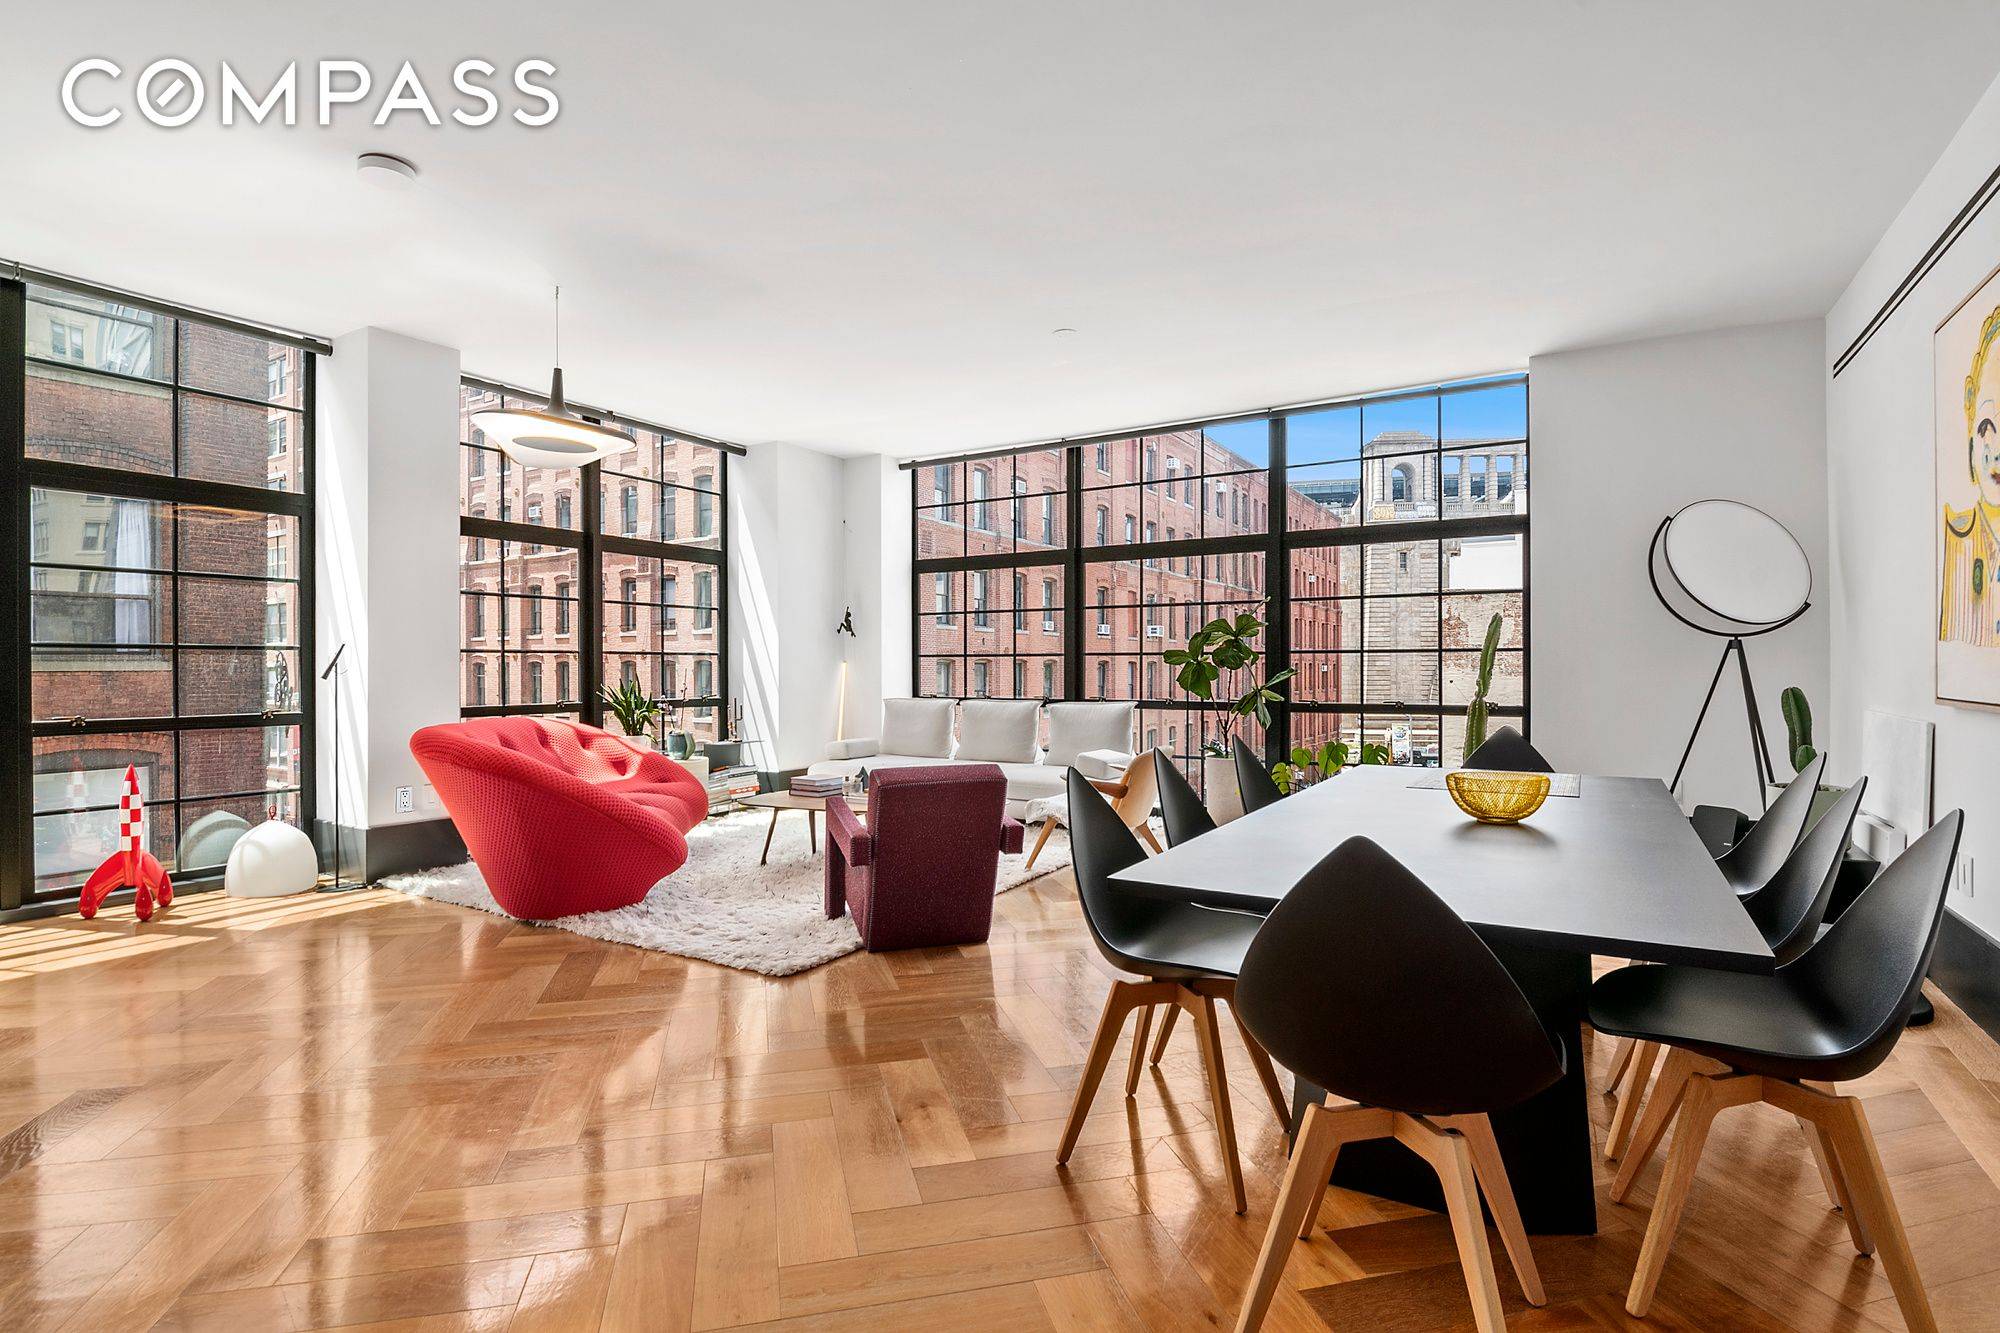 One of a kind DUMBO Dream Home wrapped in floor to ceiling glass, capturing views of the neighborhood s quintessential architecture, from the most unique vantage point.